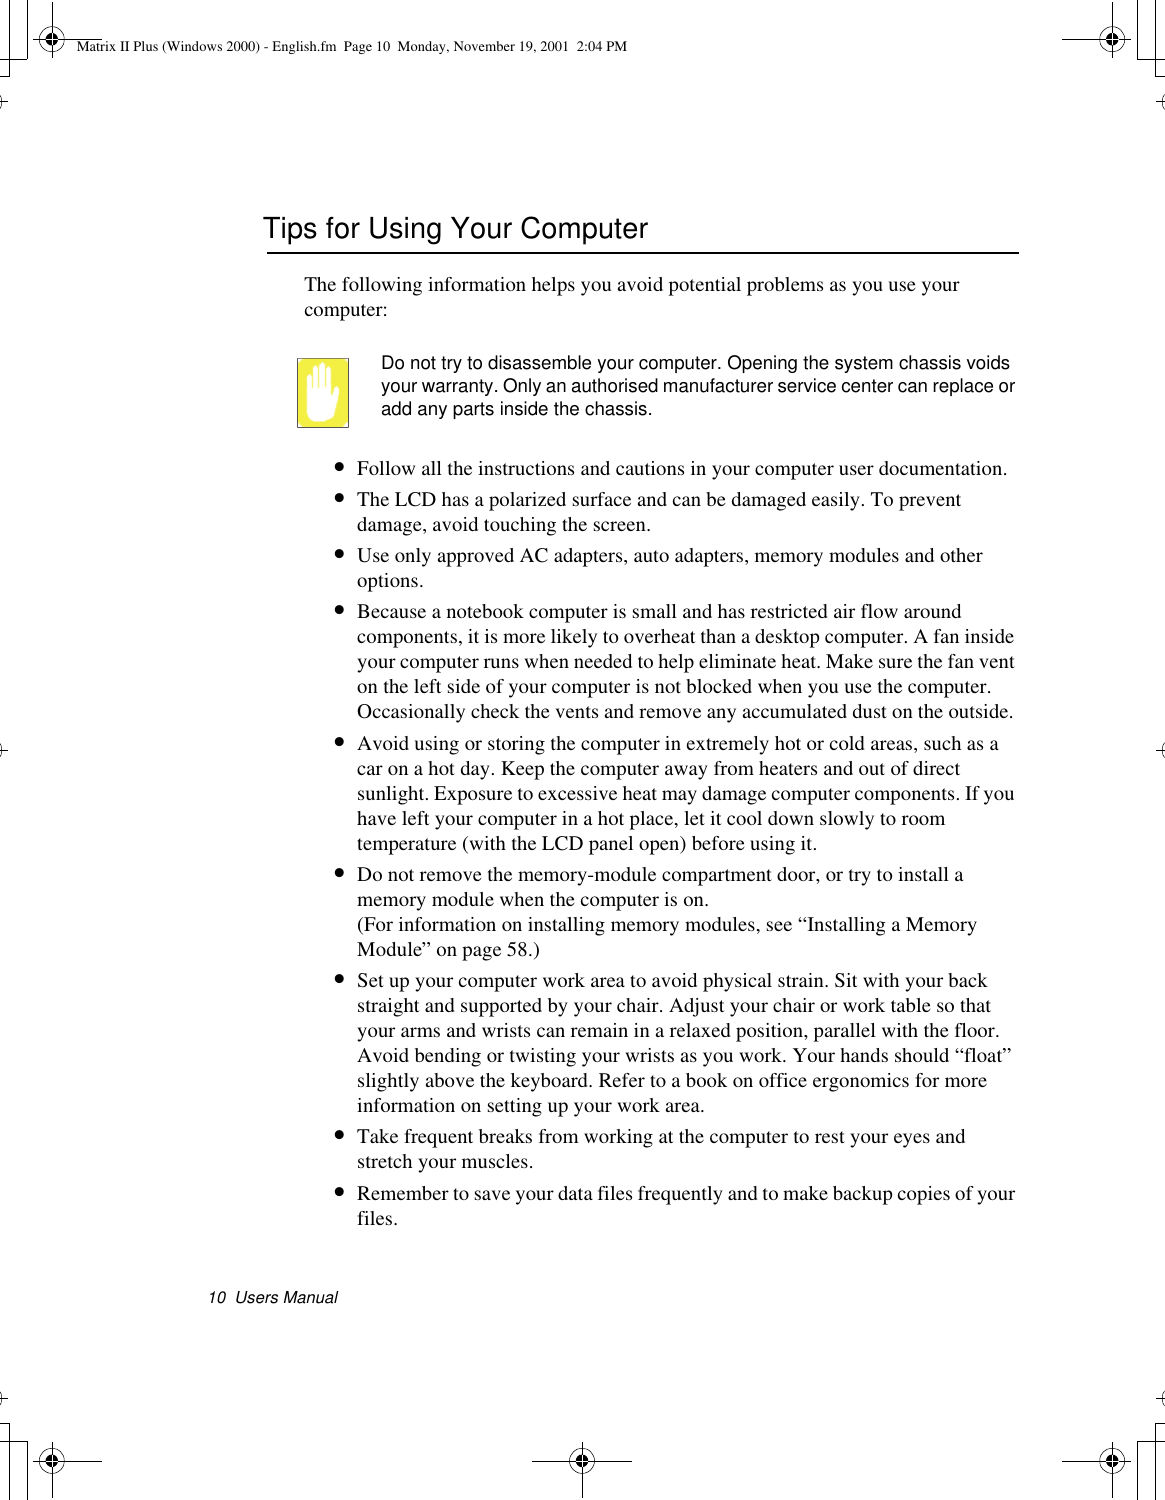 10  Users ManualTips for Using Your ComputerThe following information helps you avoid potential problems as you use your computer:Do not try to disassemble your computer. Opening the system chassis voids your warranty. Only an authorised manufacturer service center can replace or add any parts inside the chassis.•Follow all the instructions and cautions in your computer user documentation.•The LCD has a polarized surface and can be damaged easily. To prevent damage, avoid touching the screen.•Use only approved AC adapters, auto adapters, memory modules and other options.•Because a notebook computer is small and has restricted air flow around components, it is more likely to overheat than a desktop computer. A fan inside your computer runs when needed to help eliminate heat. Make sure the fan vent on the left side of your computer is not blocked when you use the computer.  Occasionally check the vents and remove any accumulated dust on the outside. •Avoid using or storing the computer in extremely hot or cold areas, such as a car on a hot day. Keep the computer away from heaters and out of direct sunlight. Exposure to excessive heat may damage computer components. If you have left your computer in a hot place, let it cool down slowly to room temperature (with the LCD panel open) before using it.•Do not remove the memory-module compartment door, or try to install a memory module when the computer is on. (For information on installing memory modules, see “Installing a Memory Module” on page 58.)•Set up your computer work area to avoid physical strain. Sit with your back straight and supported by your chair. Adjust your chair or work table so that your arms and wrists can remain in a relaxed position, parallel with the floor. Avoid bending or twisting your wrists as you work. Your hands should “float” slightly above the keyboard. Refer to a book on office ergonomics for more information on setting up your work area.•Take frequent breaks from working at the computer to rest your eyes and stretch your muscles. •Remember to save your data files frequently and to make backup copies of your files.Matrix II Plus (Windows 2000) - English.fm  Page 10  Monday, November 19, 2001  2:04 PM